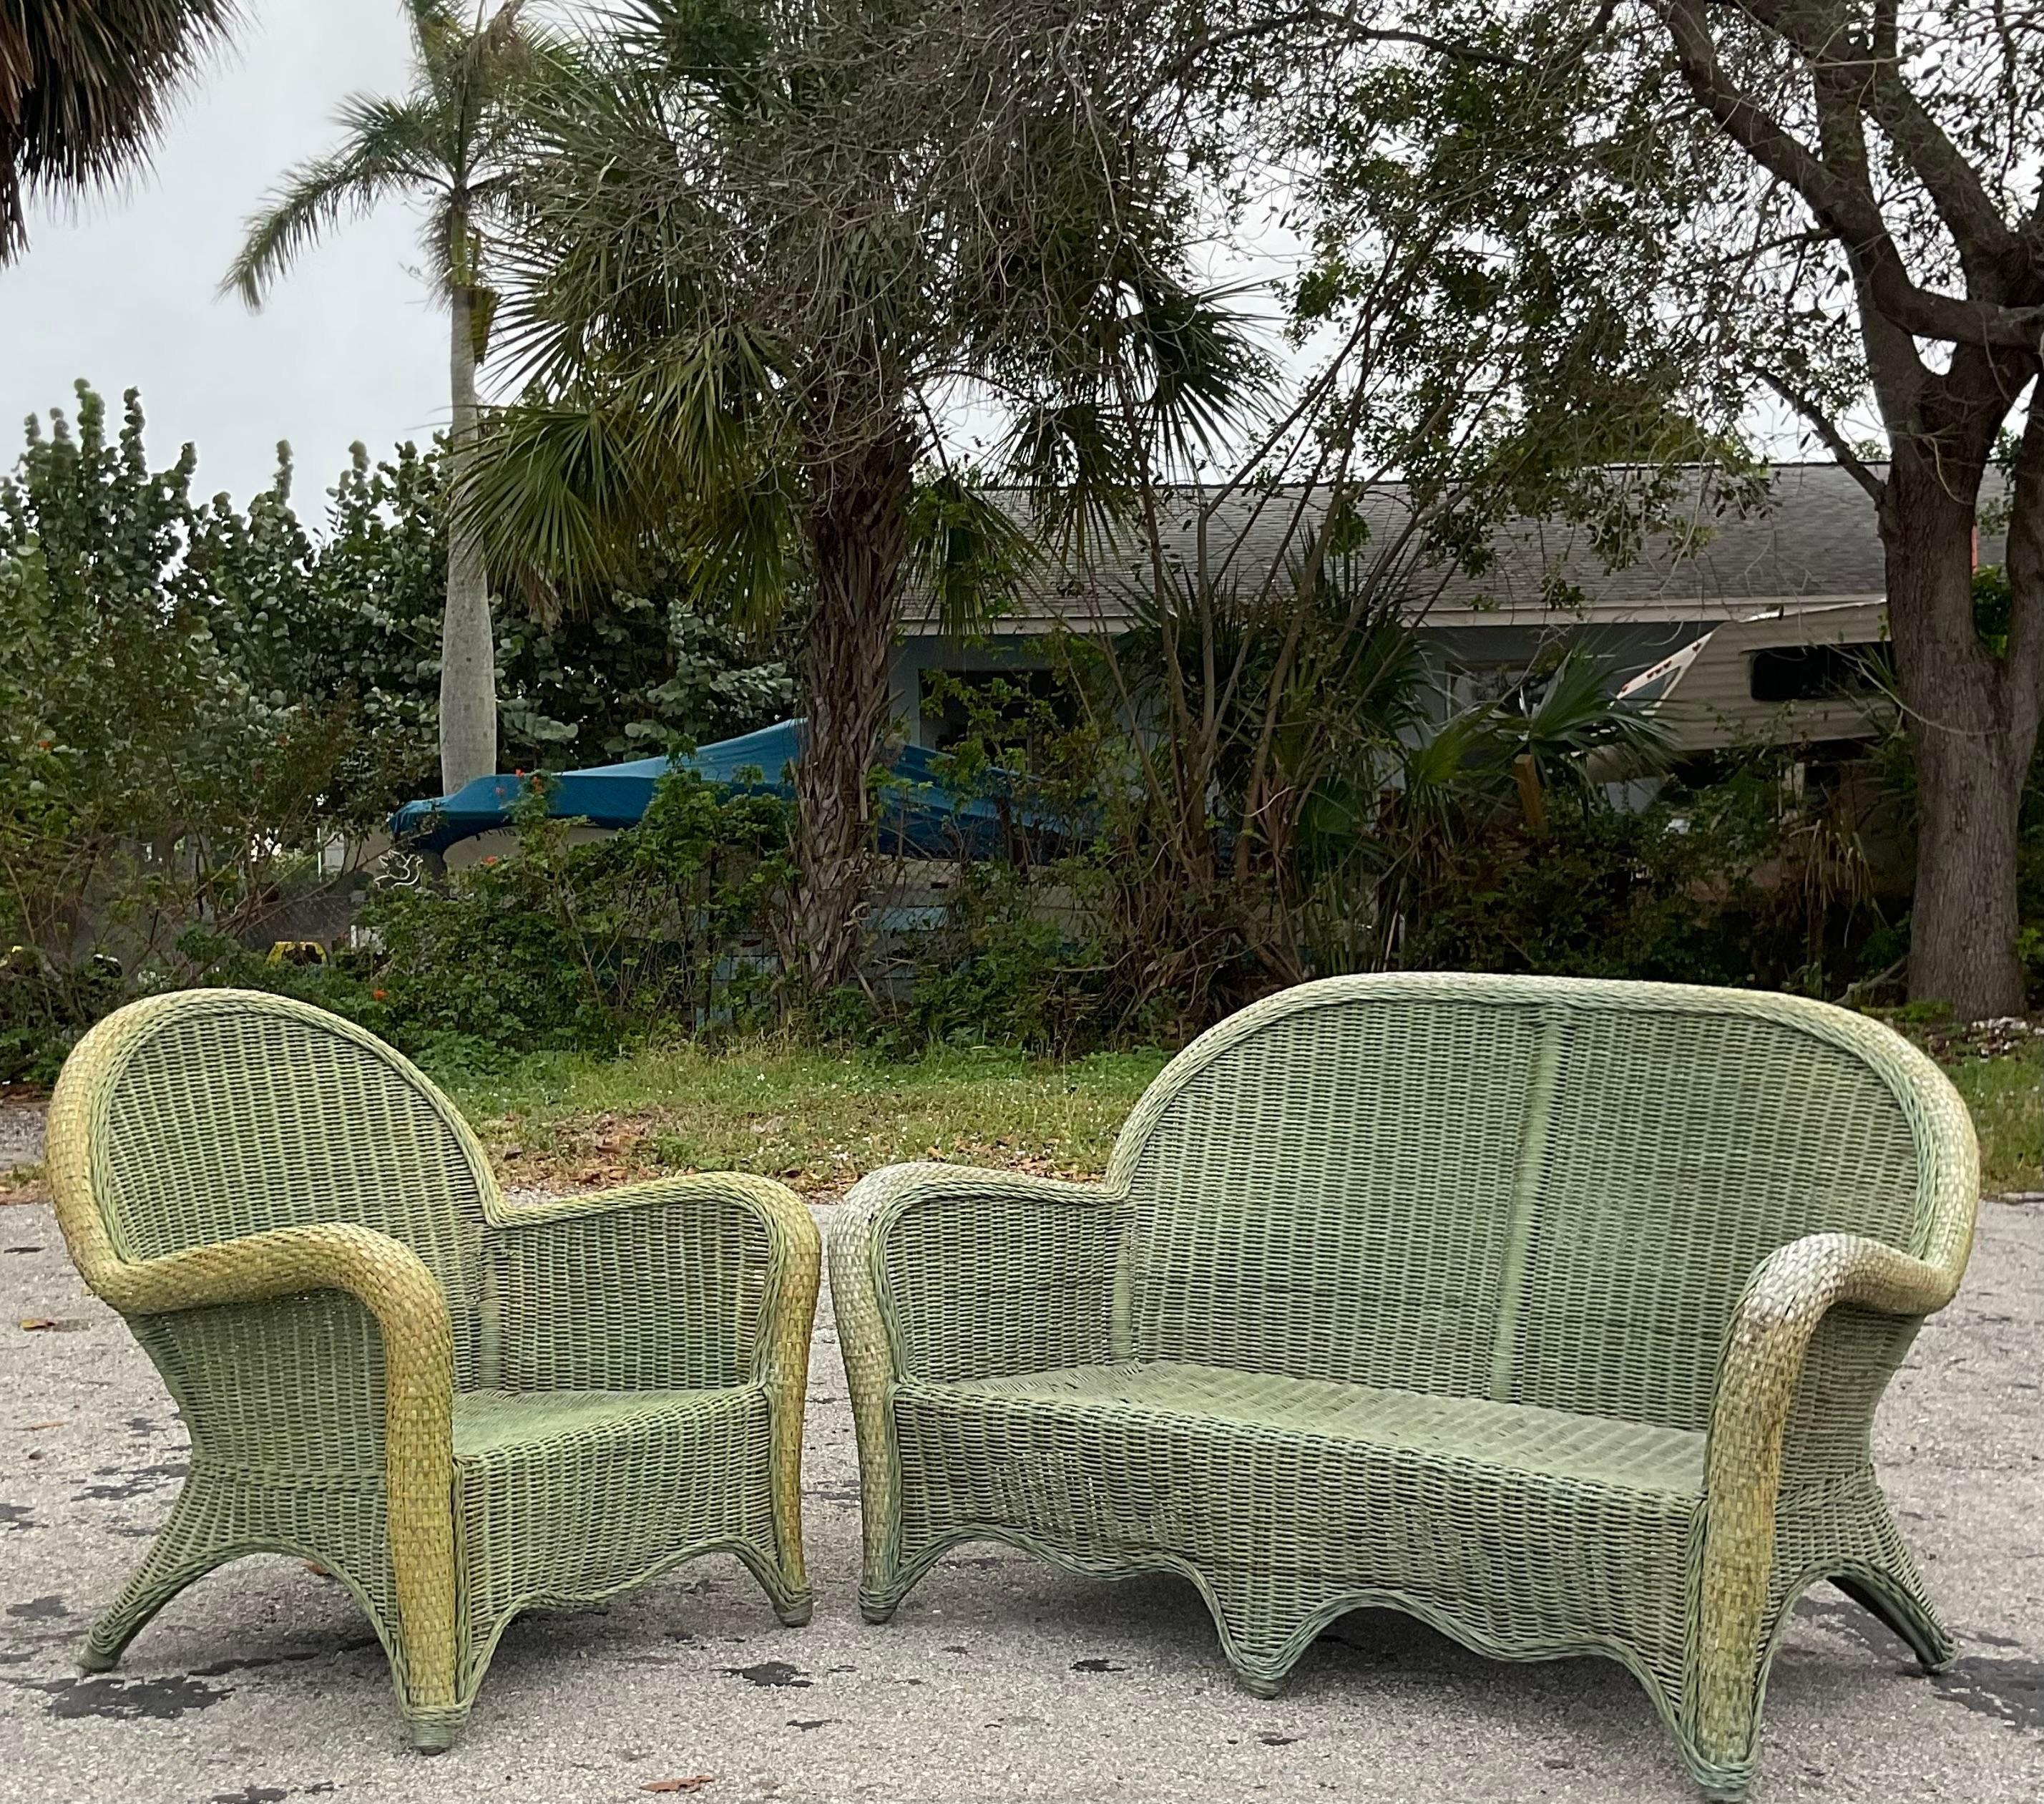 A fabulous set of loveseat and chair. A chic woven rattan in a classic roll back design. A chic green color with a beautiful patina from time. Acquired from a Palm Beach estate.

Chair 30x22.5x33.5